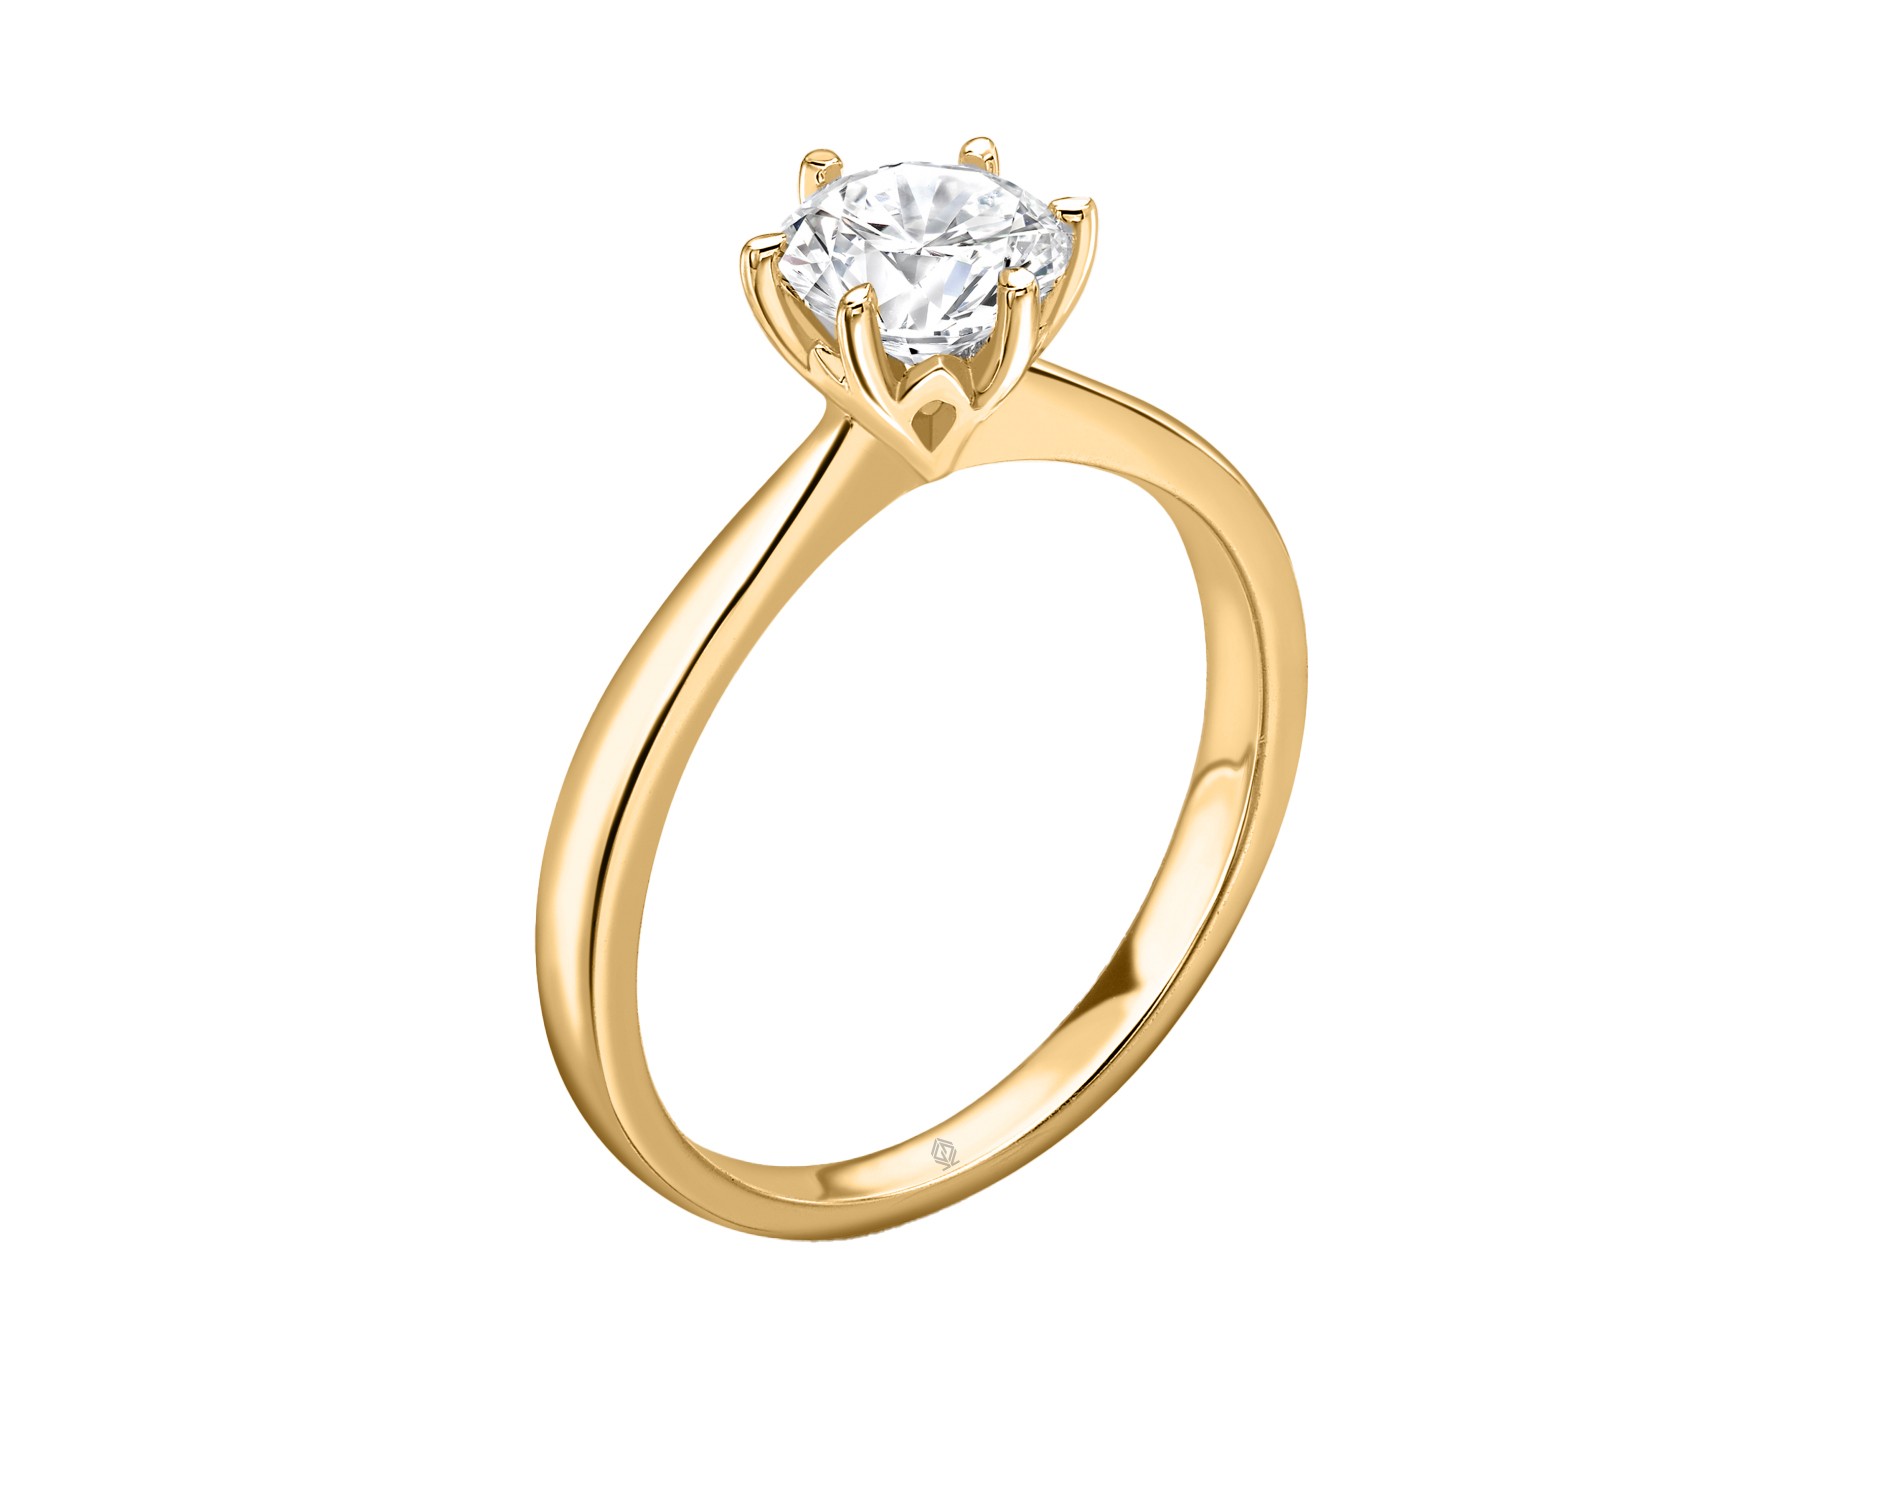 18K YELLOW GOLD 6 PRONGS HEAD SOLITAIRE ROUND CUT DIAMOND ENGAGEMENT RING